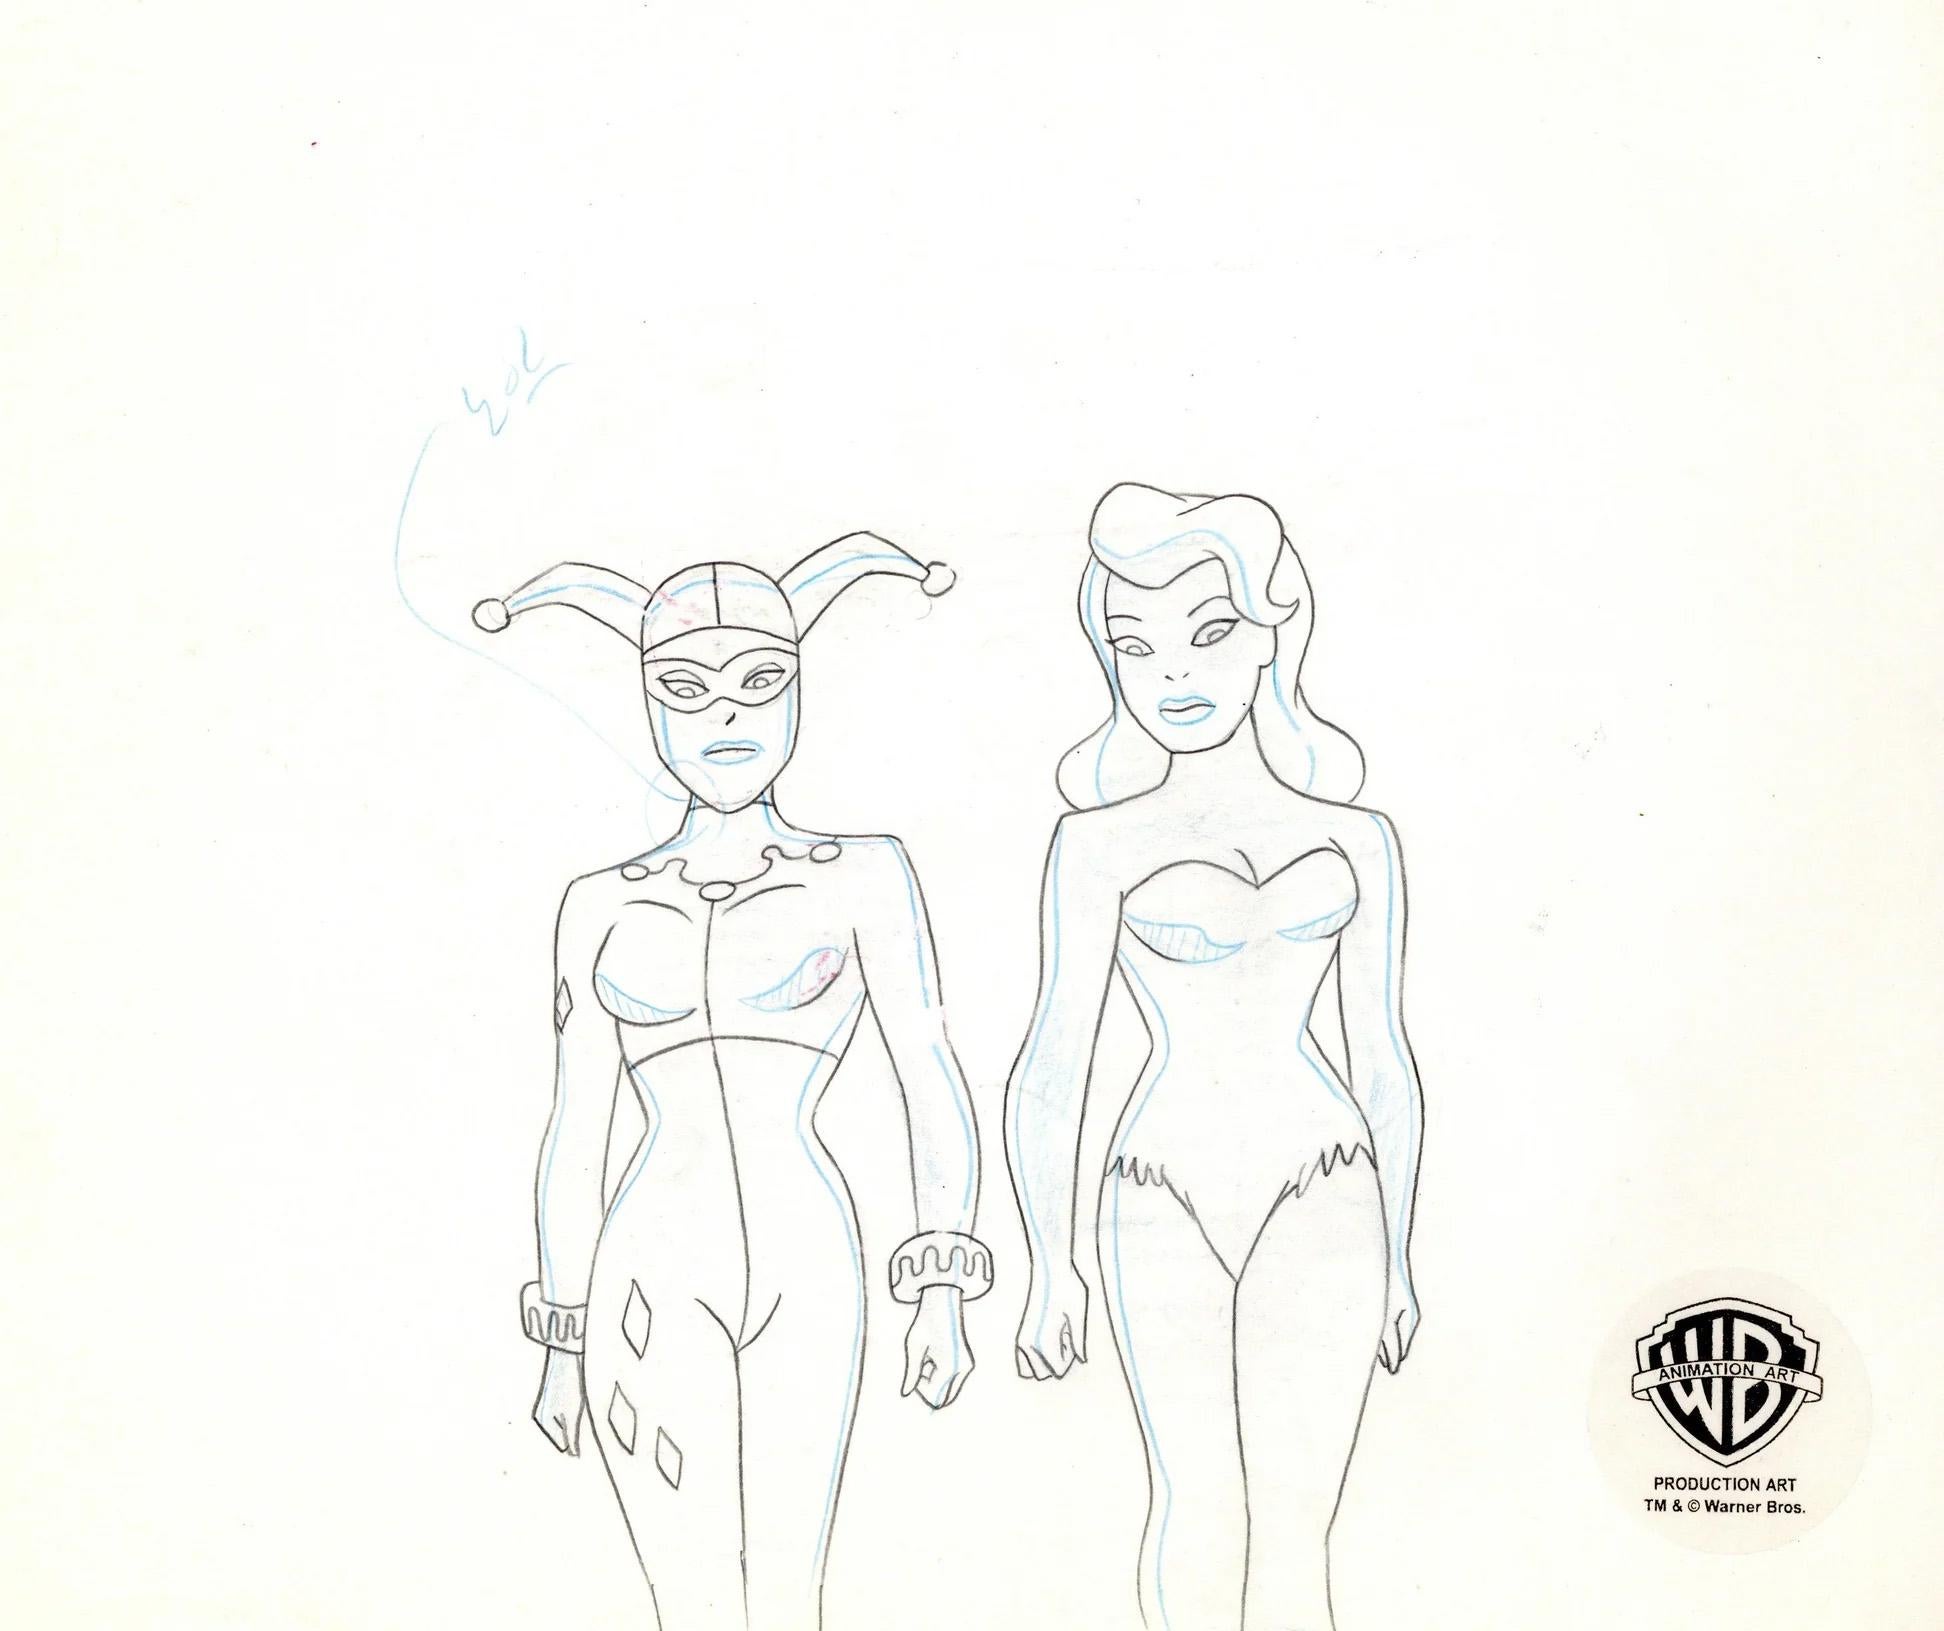 Batman The Animated Series Original Production Drawing: Harley and Poison Ivy - Art by DC Comics Studio Artists